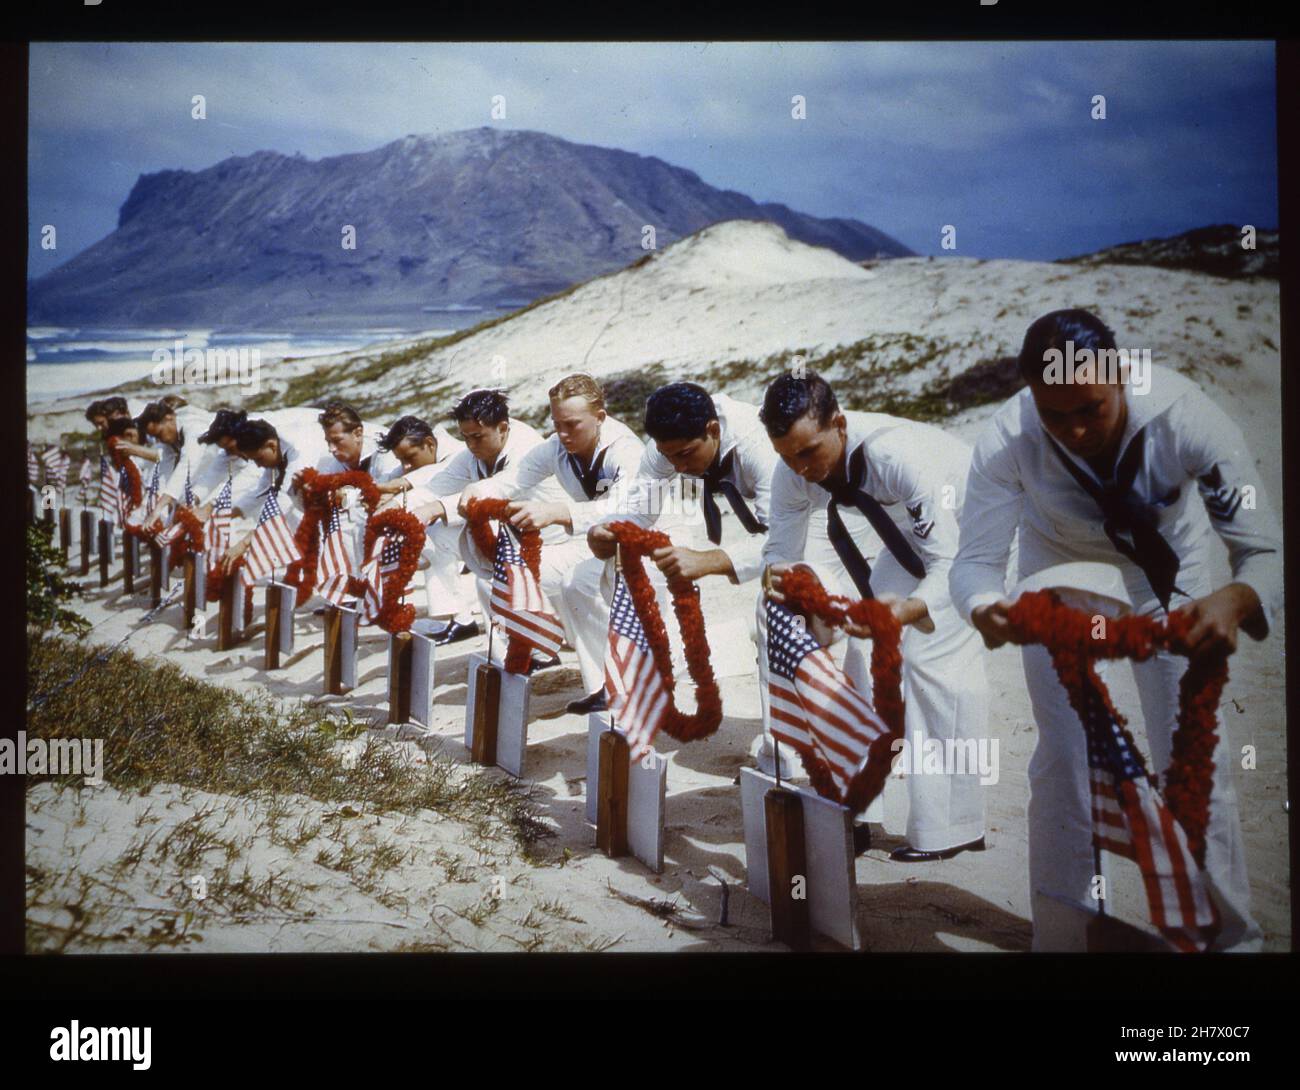 Hawaiian Islands, Spring 1942 -- Original Caption - 'In Hawaiian tradition, sailors pay tribute to casualties of the Pearl Harbor attack at a Hawaiian Islands cemetery, circa Spring 1942. Possibly taken on Memorial Day.' Photo by US Navy Stock Photo